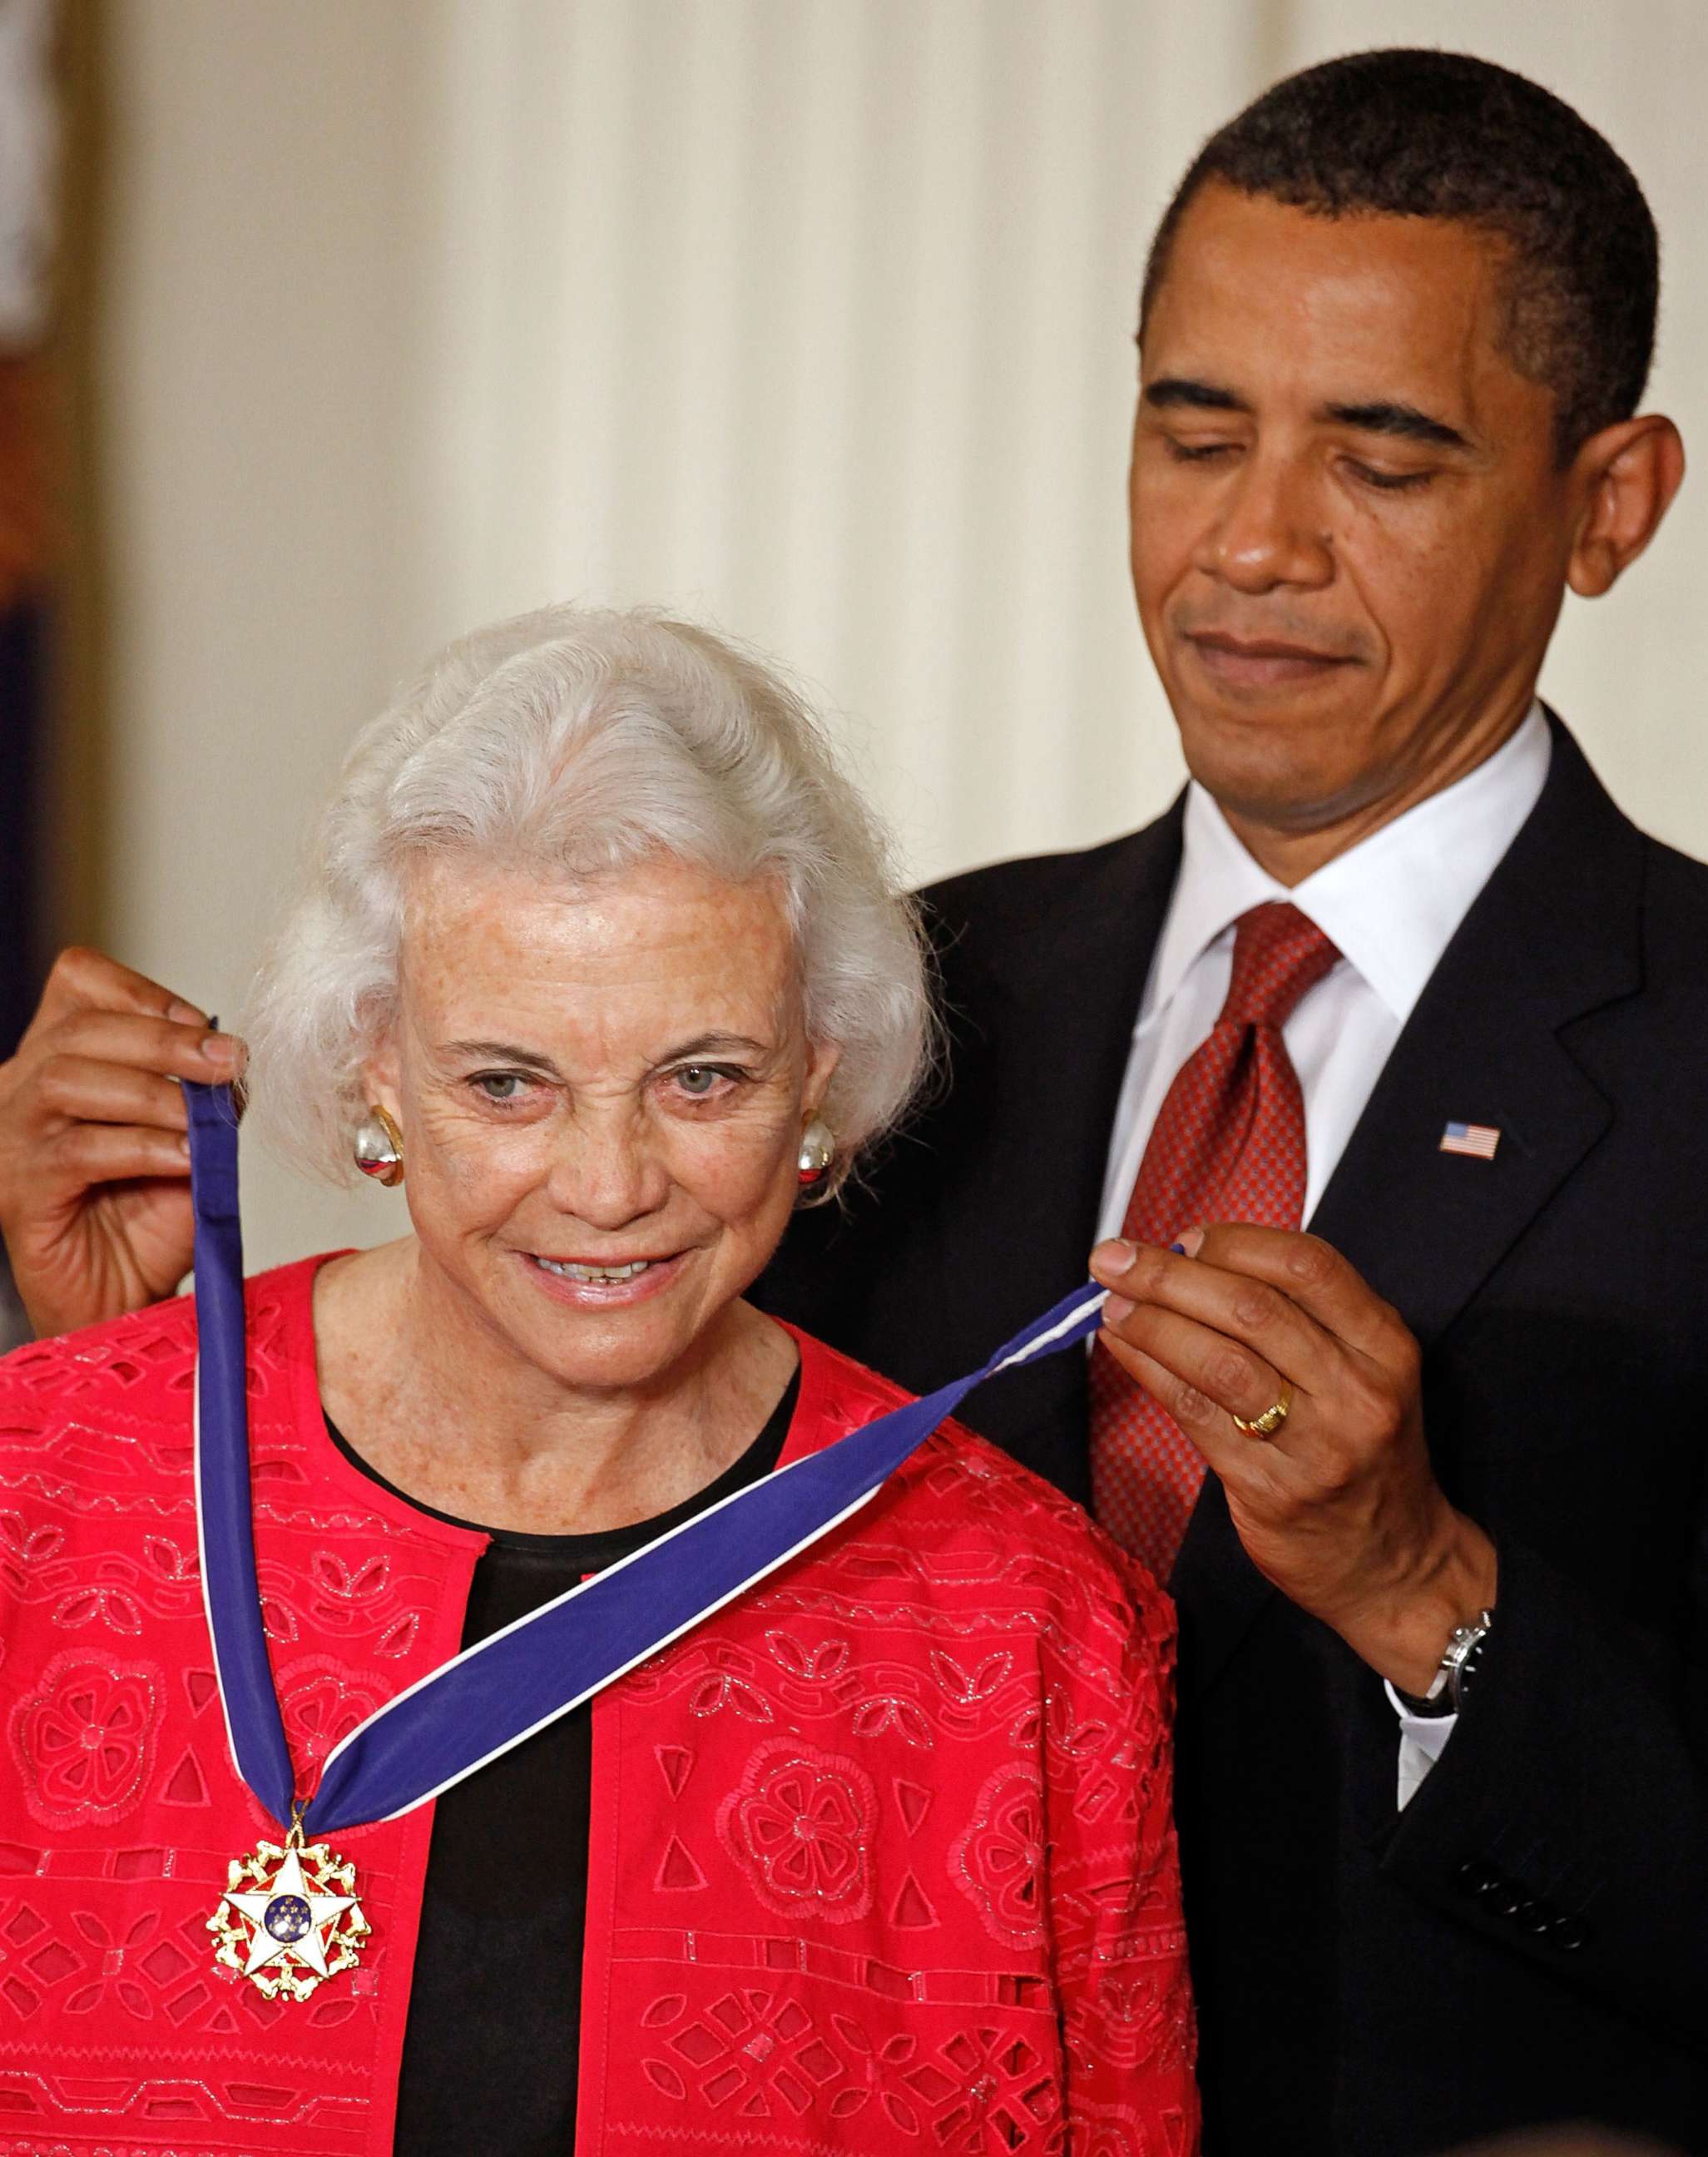 PHOTO: President Barack Obama presents the Medal of Freedom to retired Supreme Court Justice Sandra Day O'Connor during a ceremony in the East Room of the White House August 12, 2009, in Washington.